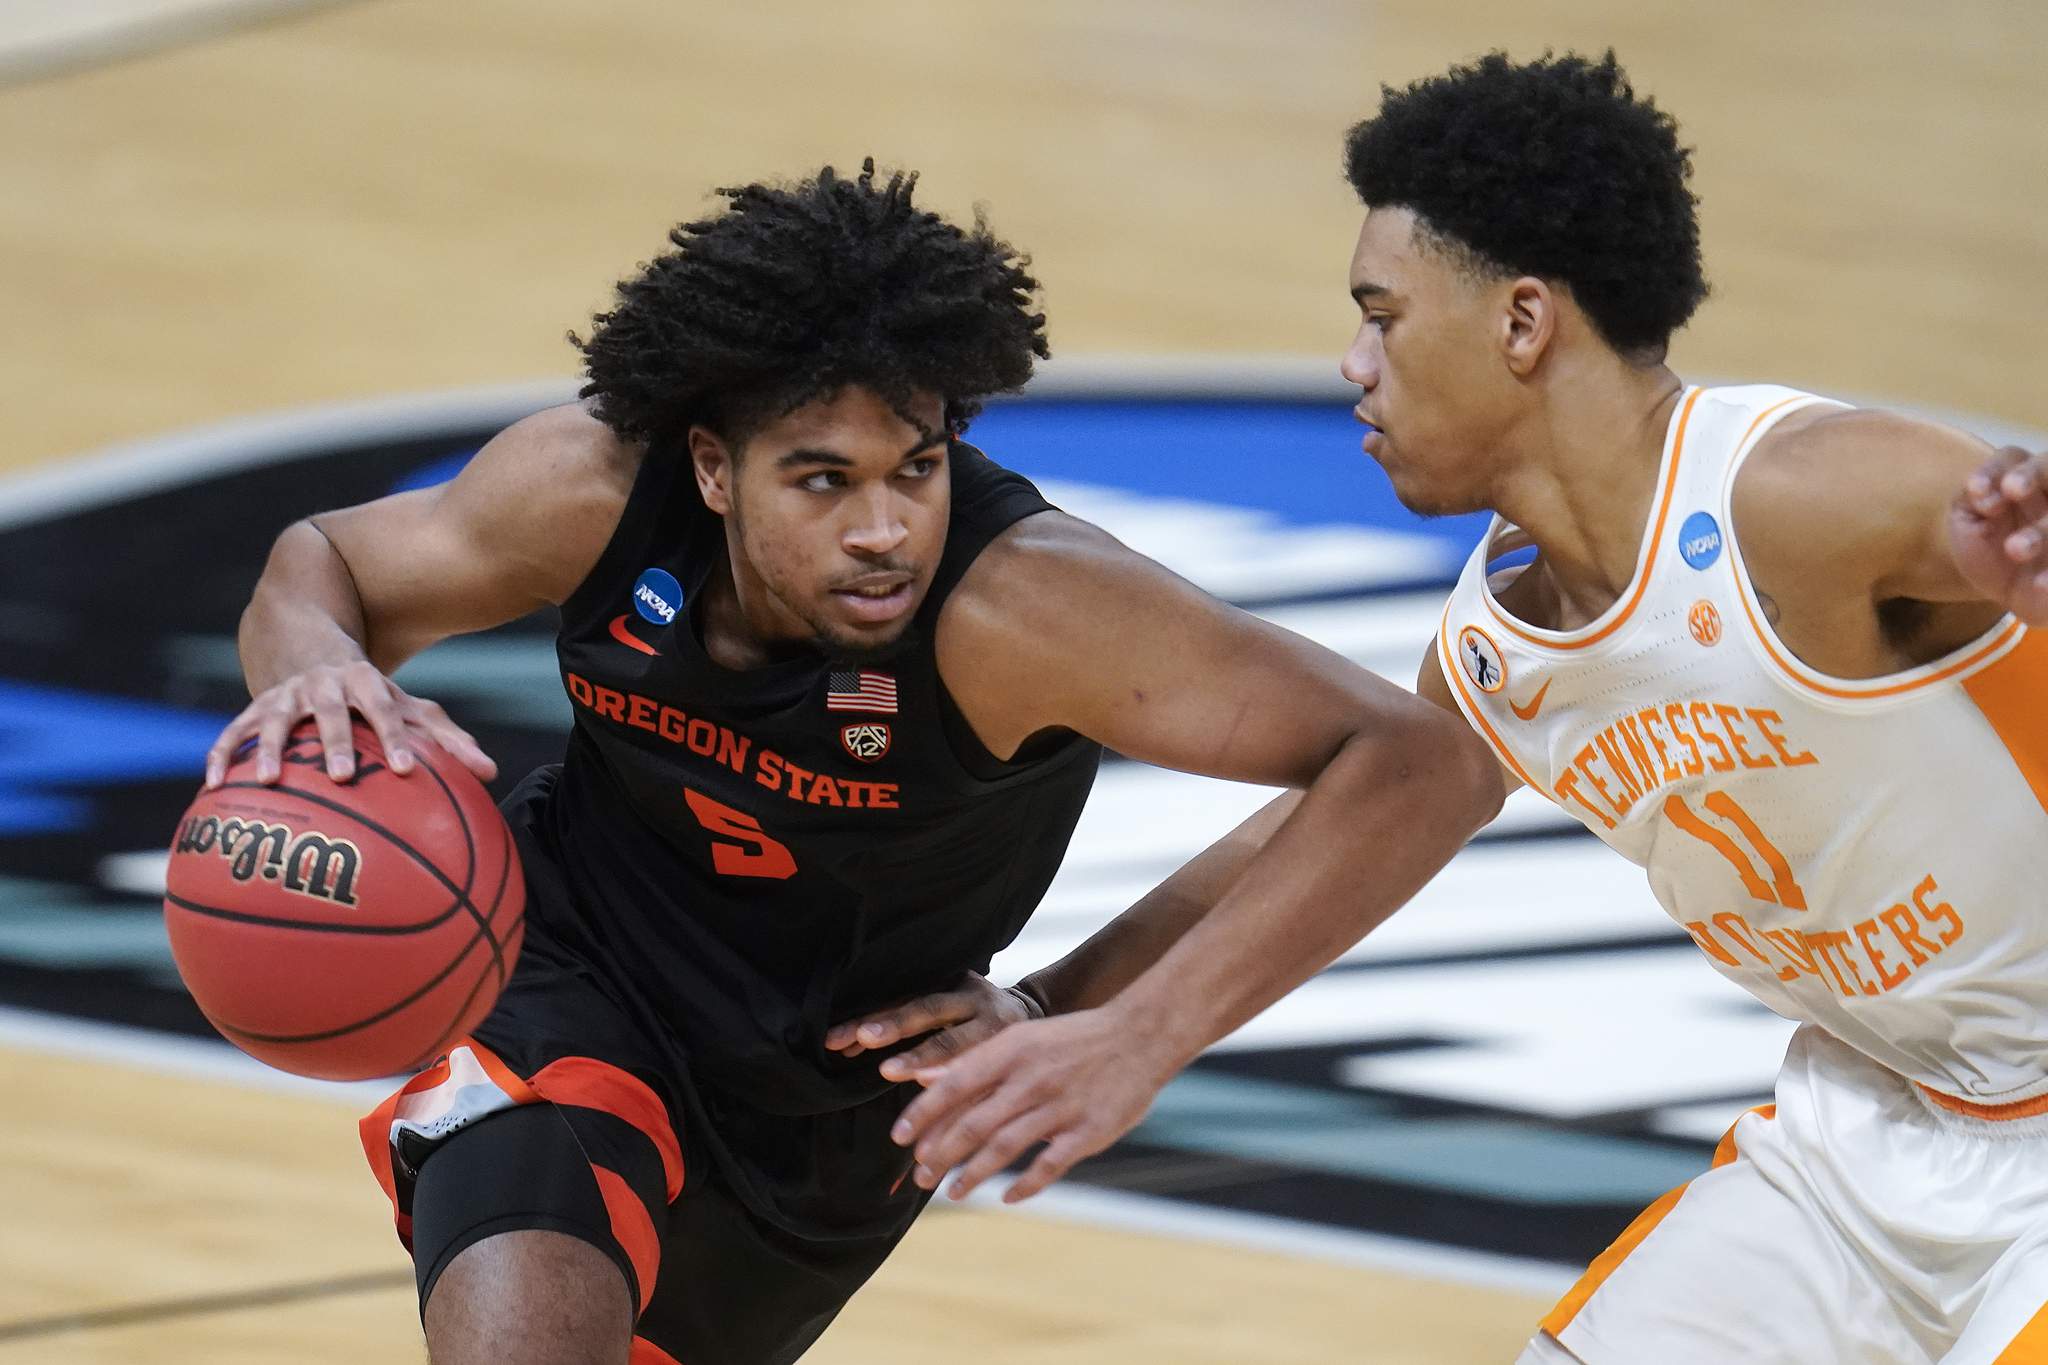 Oregon State takes down Tennessee 70-56 as No. 12 seed